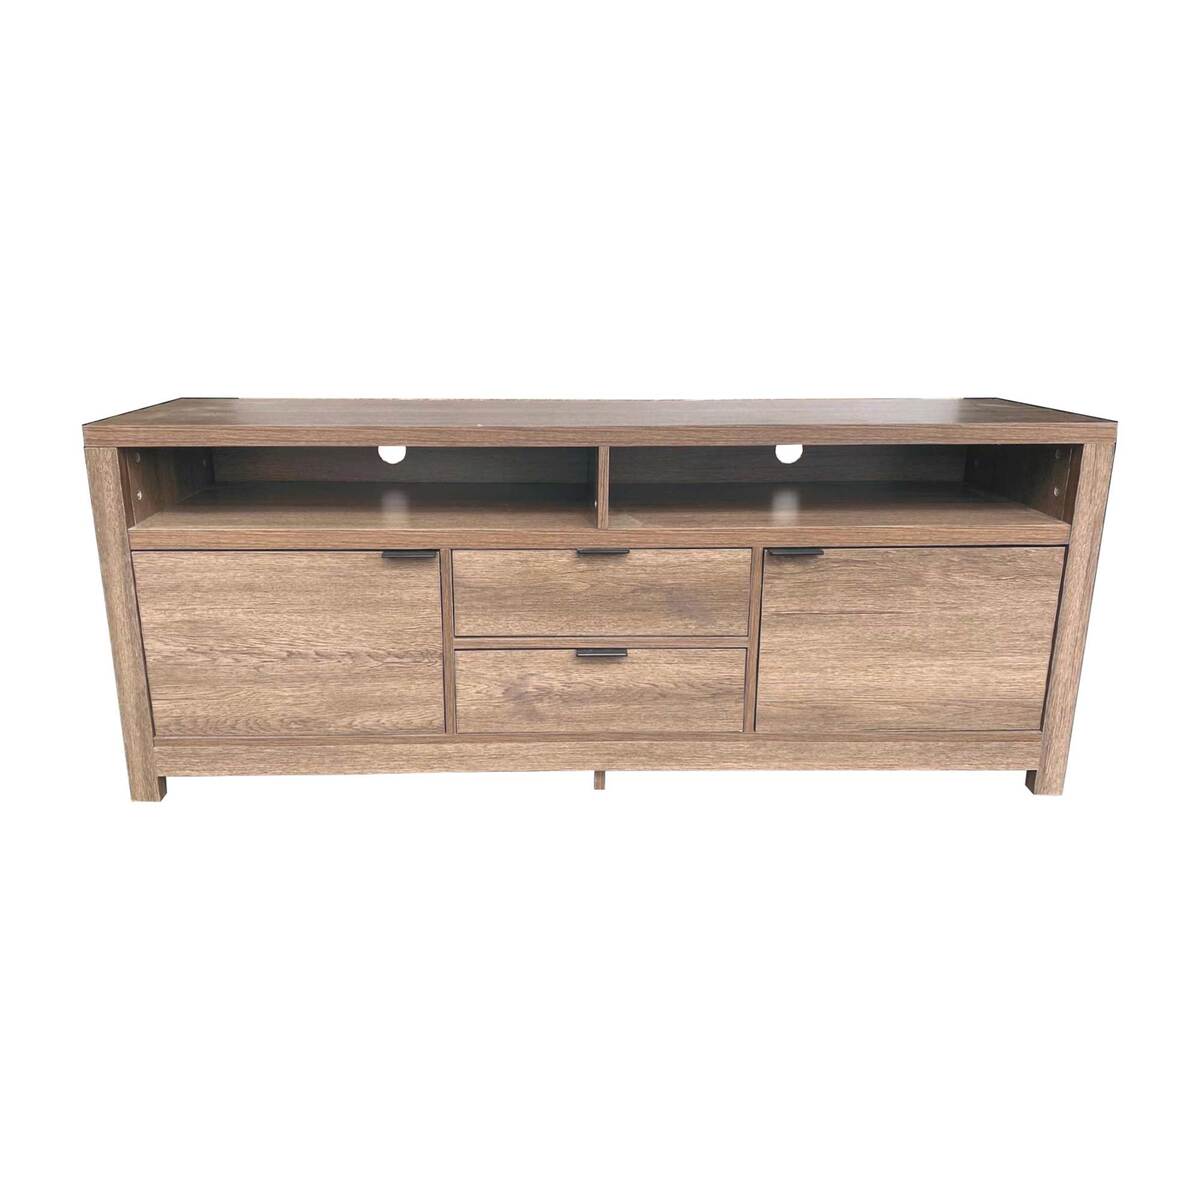 Maple Leaf TV Cabinet Wood Costv104 Size:60X39X150 Cms (HxWxL) (Made In Malaysia)